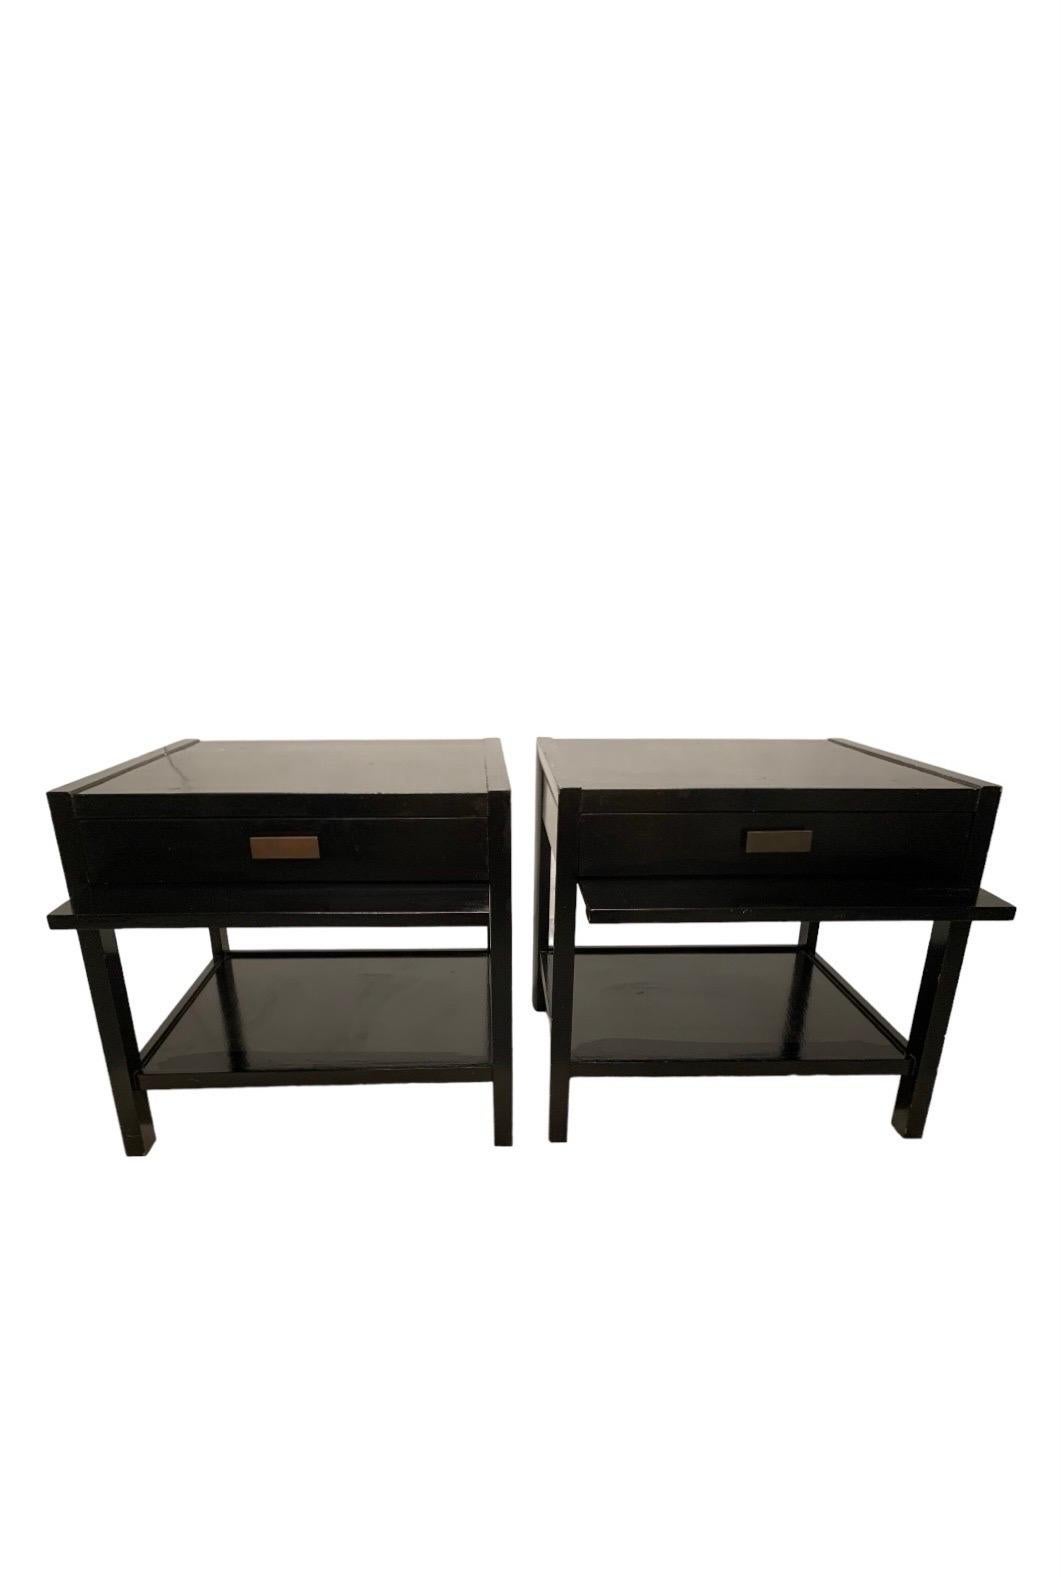 American Black End Table Nightstands in the Style of Paul McCobb, a Pair